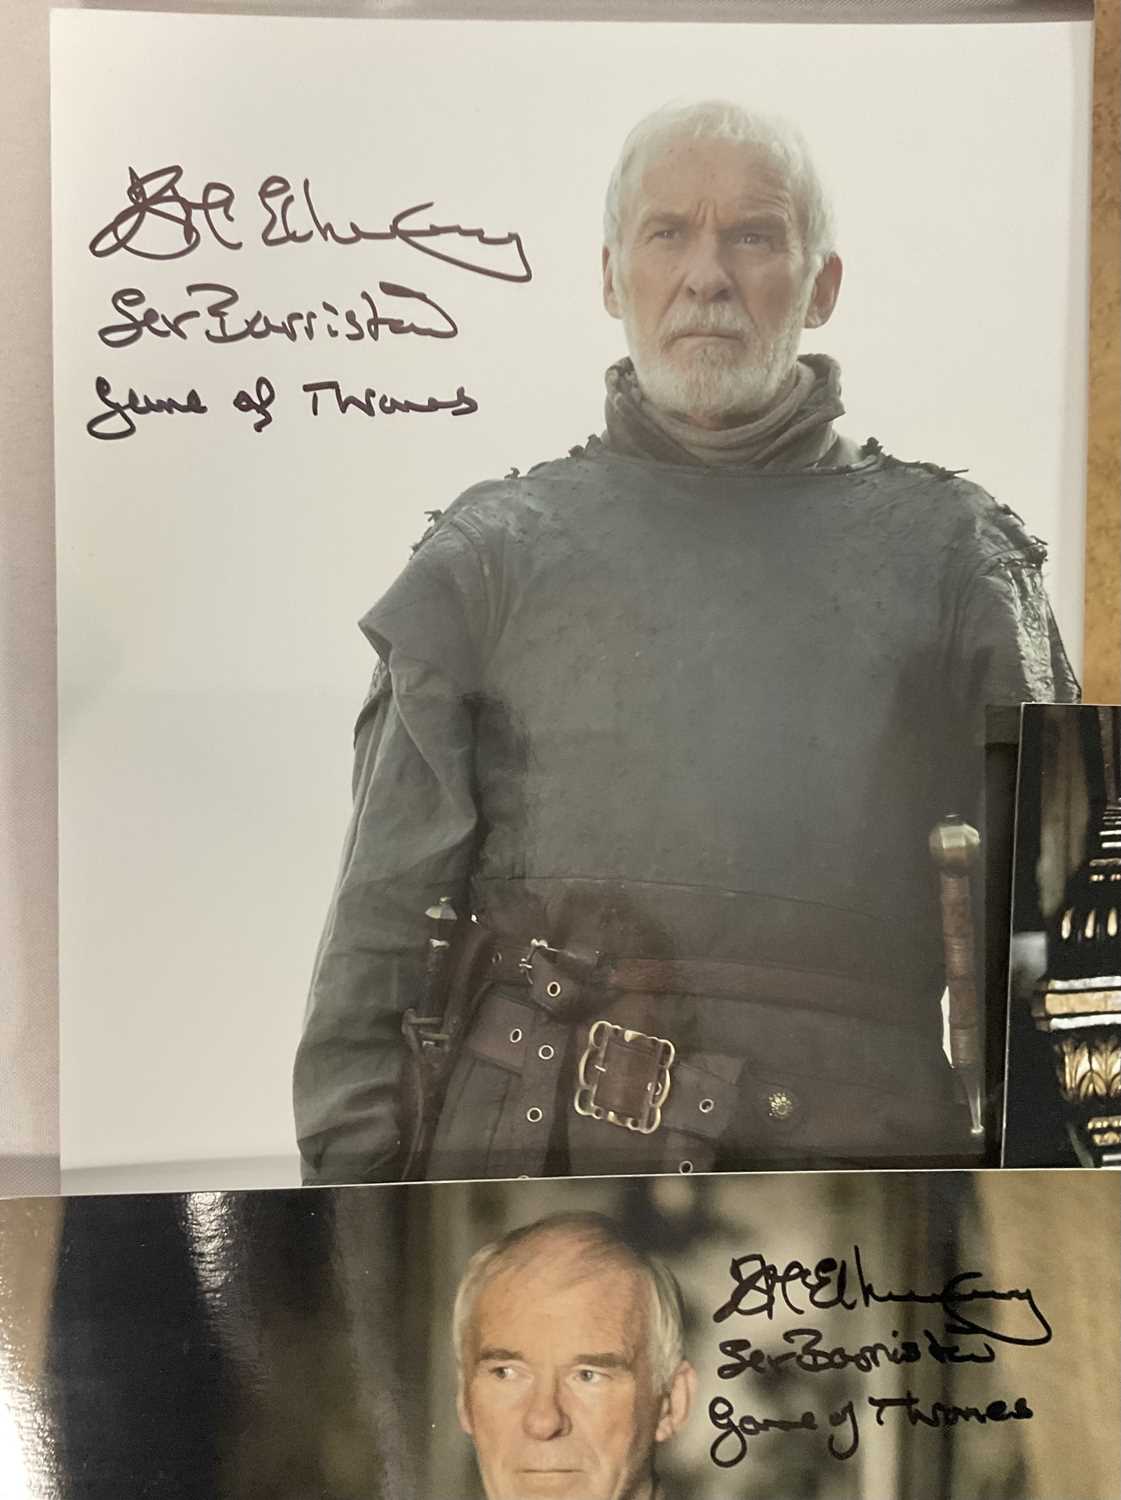 A group of ten GAME OF THRONES promotional stills signed by Ian McElhinney who played the - Image 3 of 5